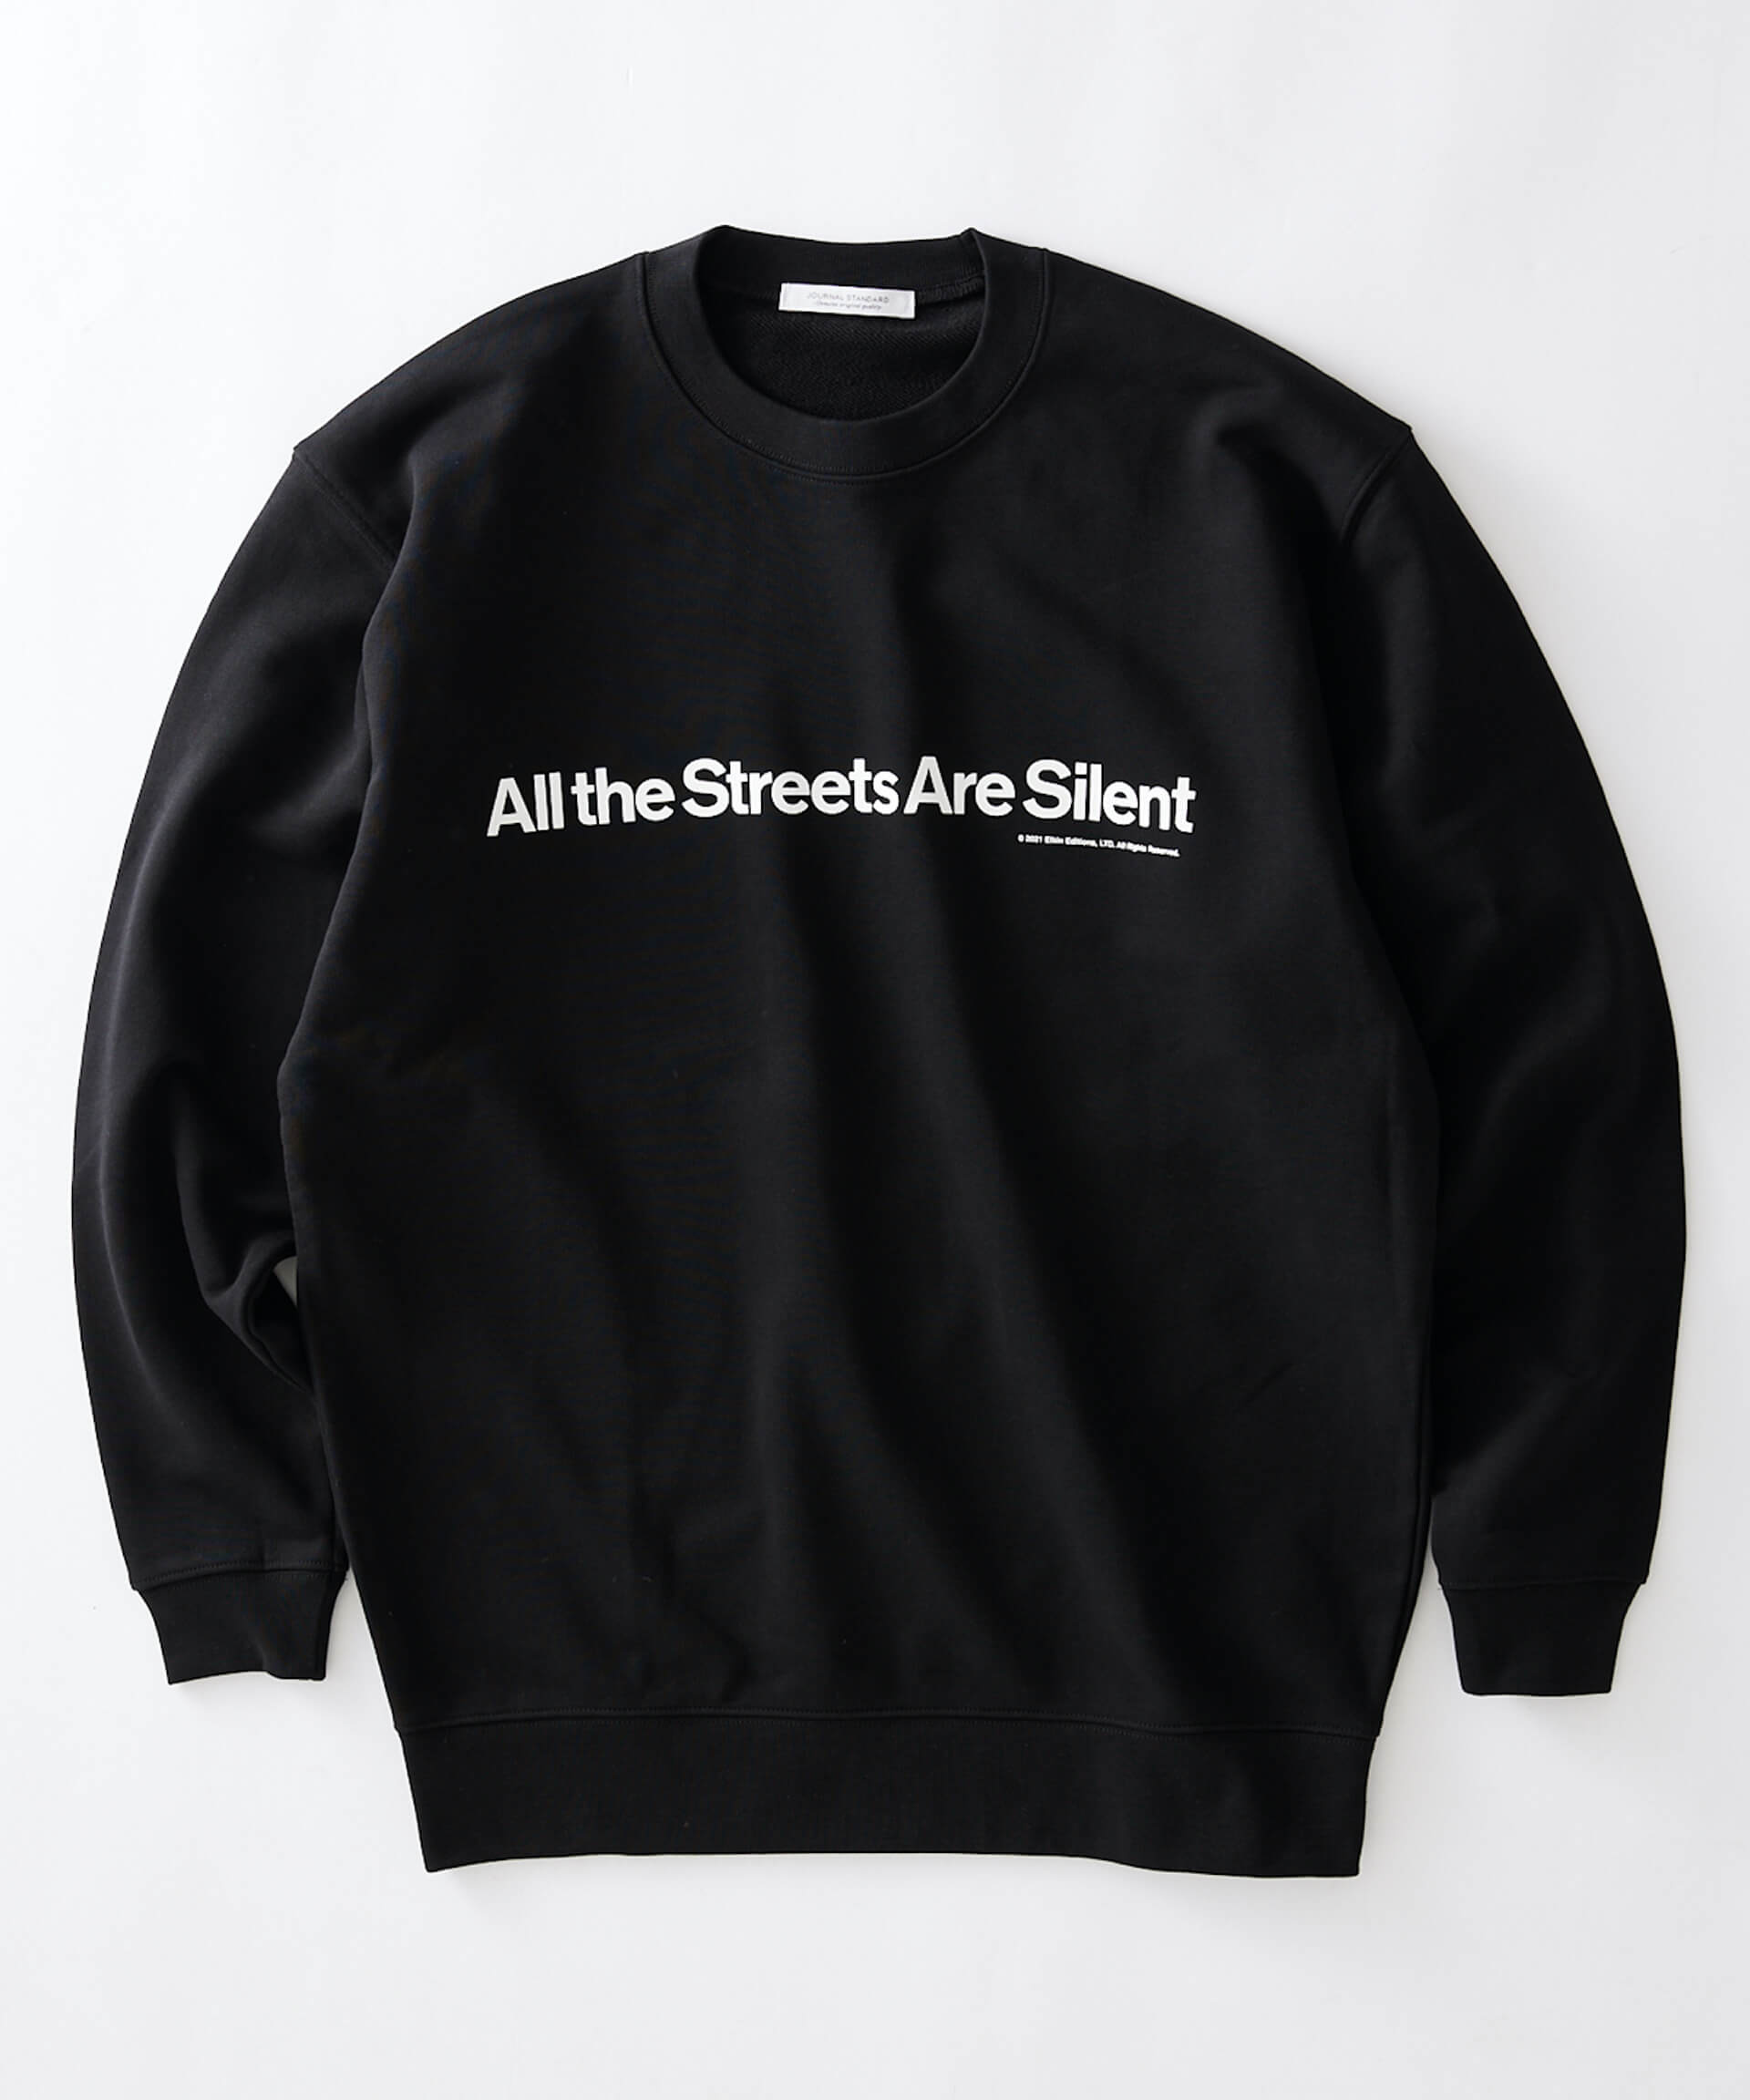 All the Streets Are Silent x JOURNAL STANDARD